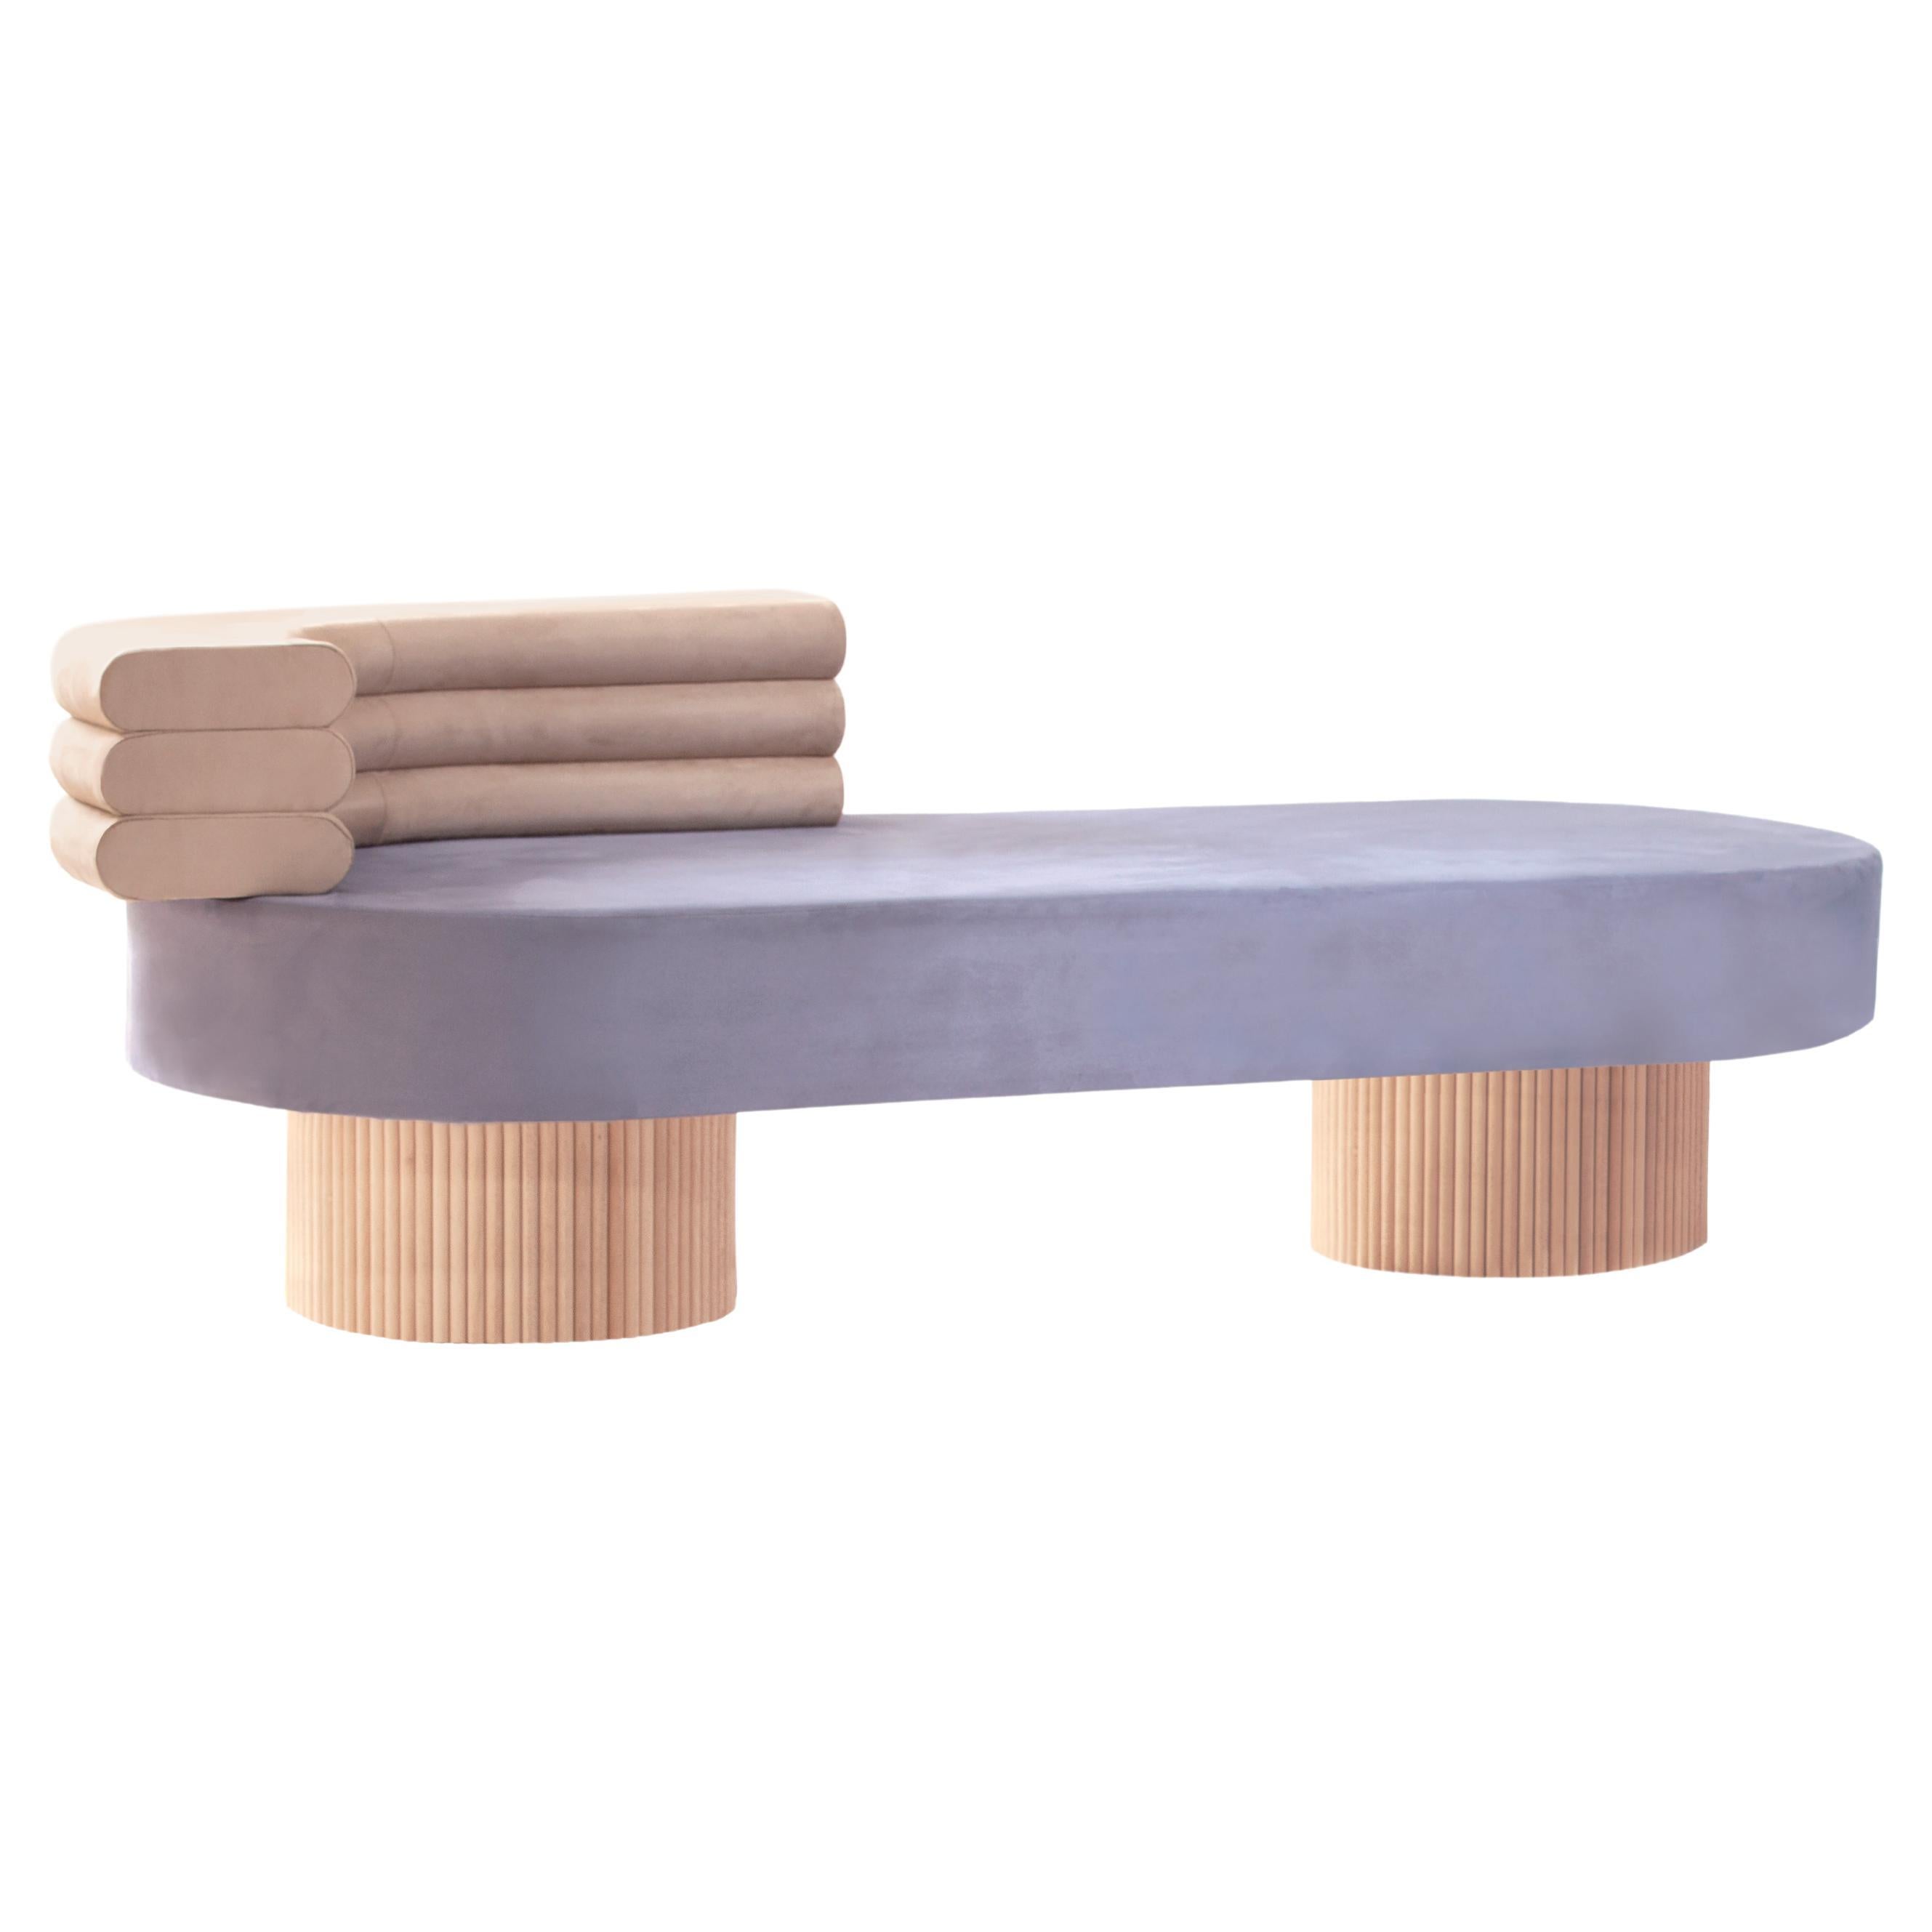 O Chaise Longue Contemporary Minimal Limited Edition in Sand and Light Indigo  For Sale